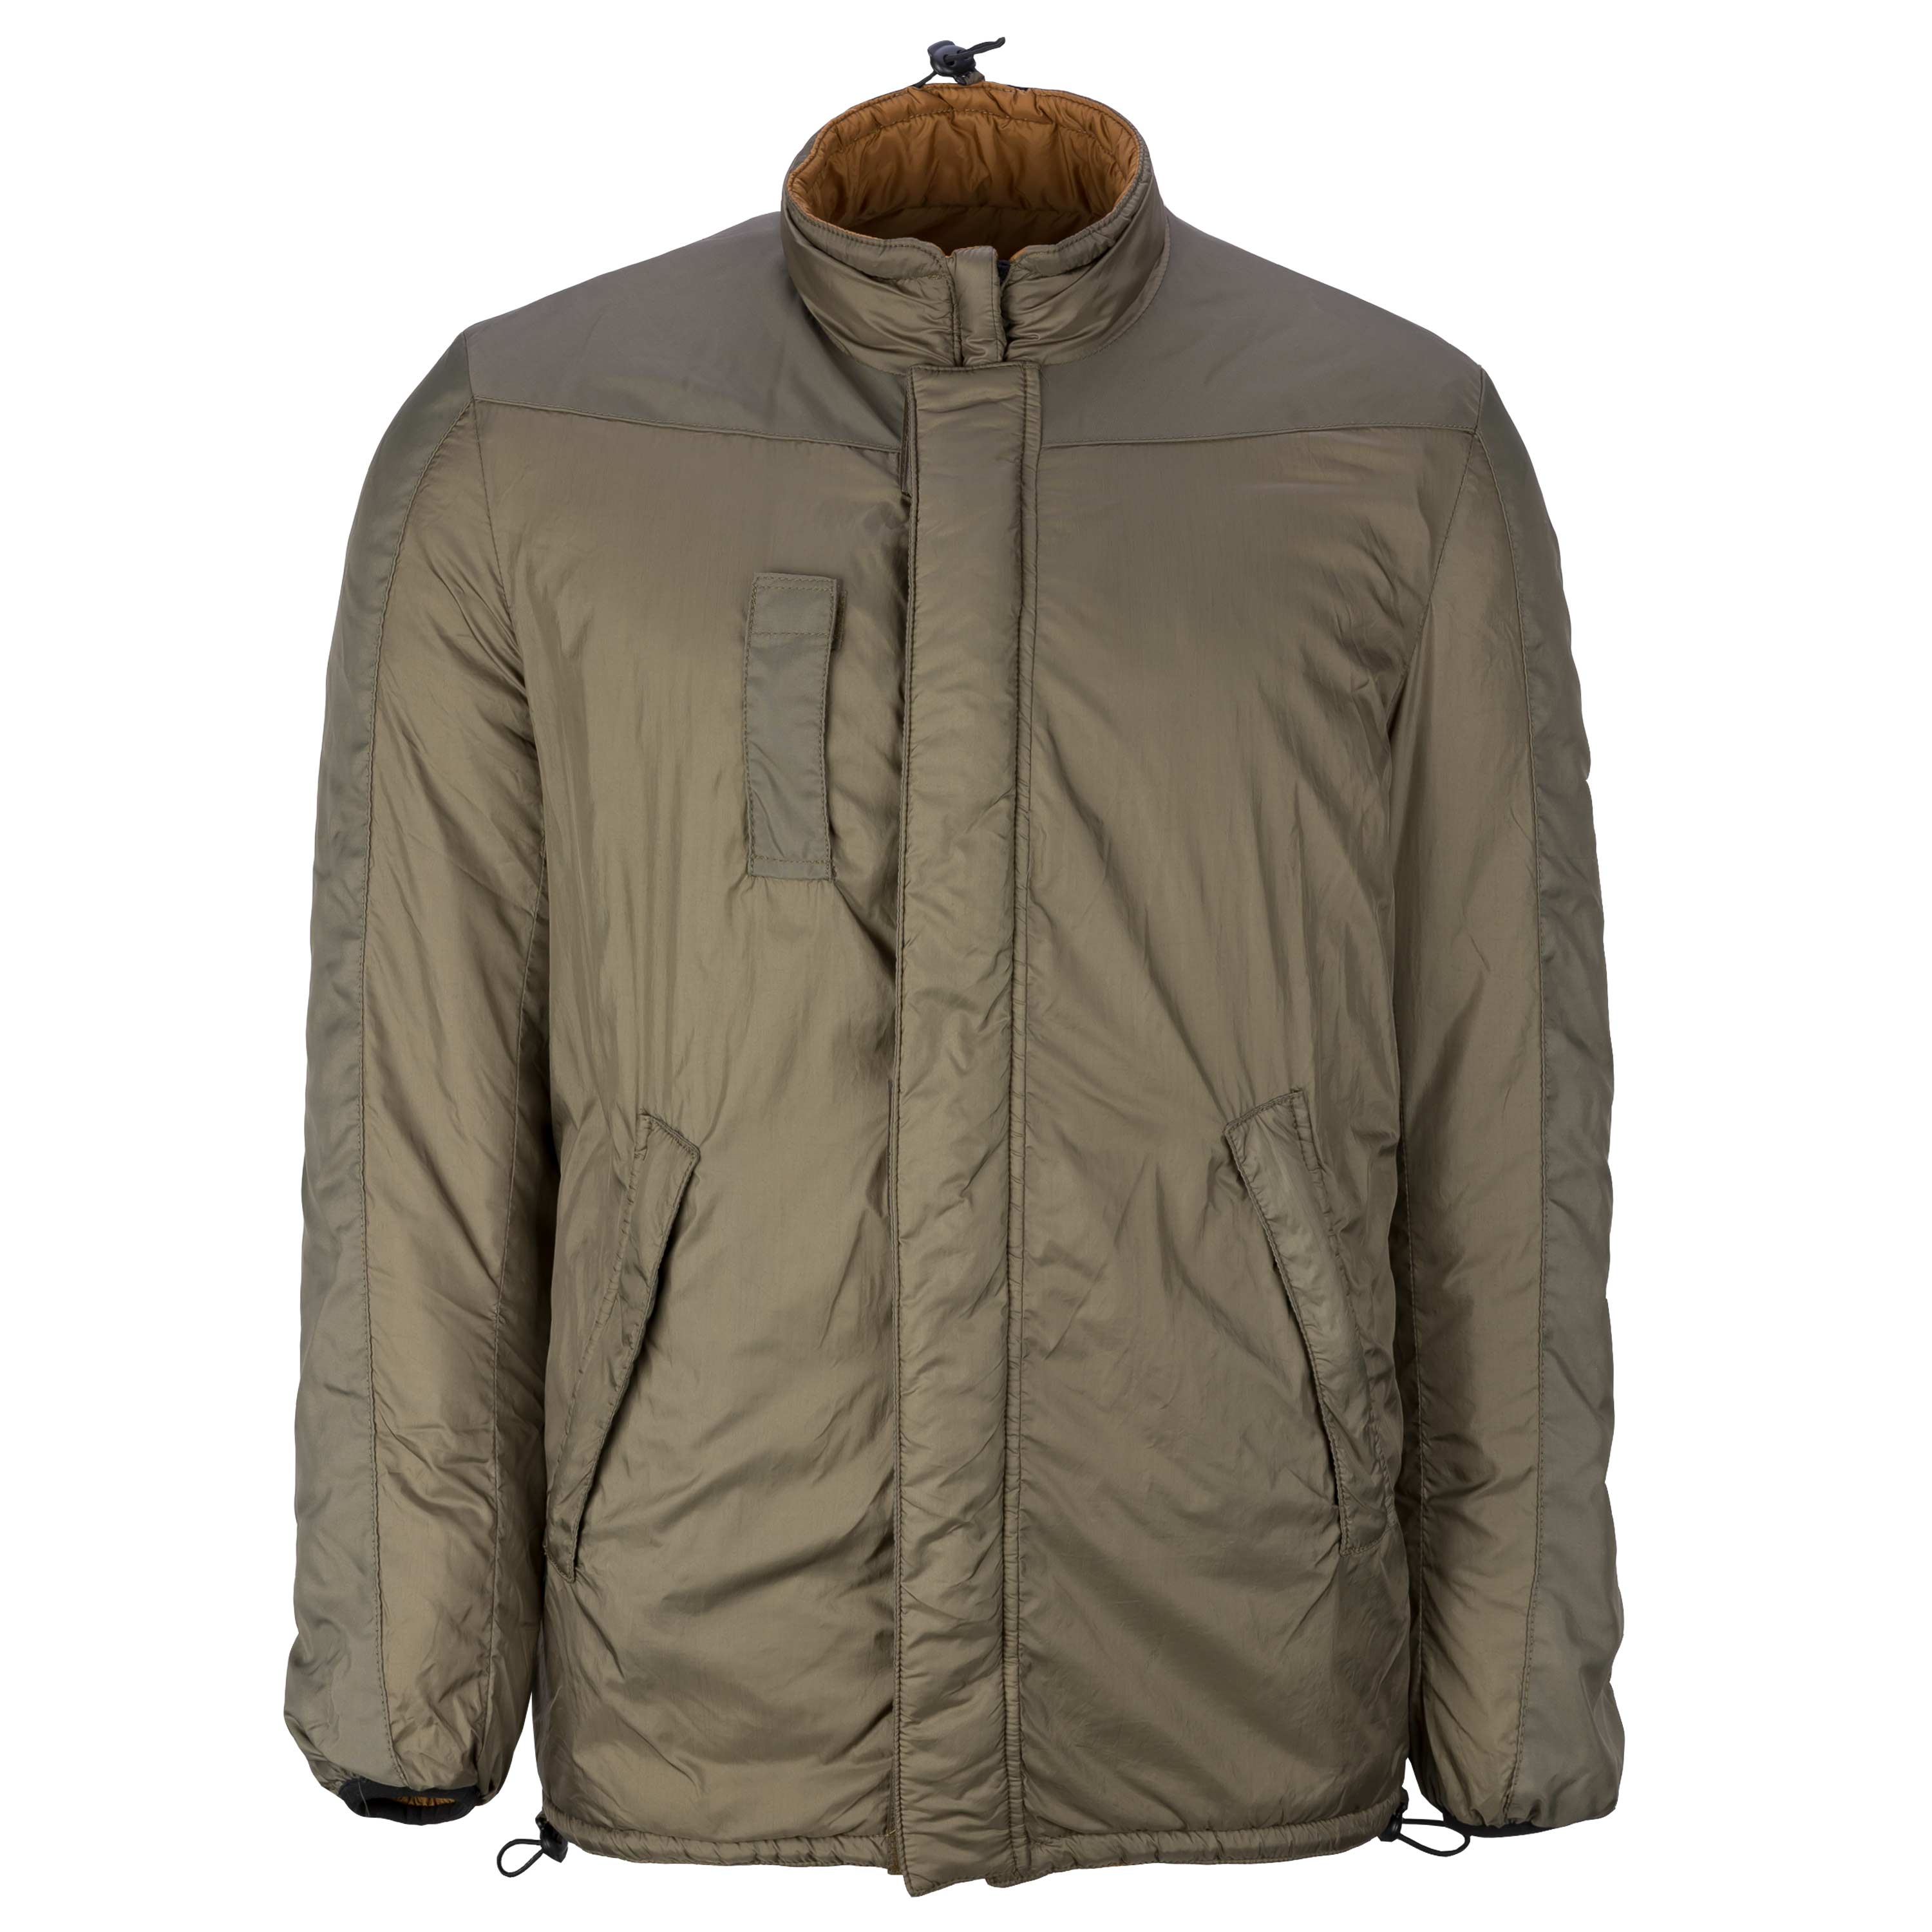 Purchase the Used Dutch Thermal Jacket Reversible olive/coyote b